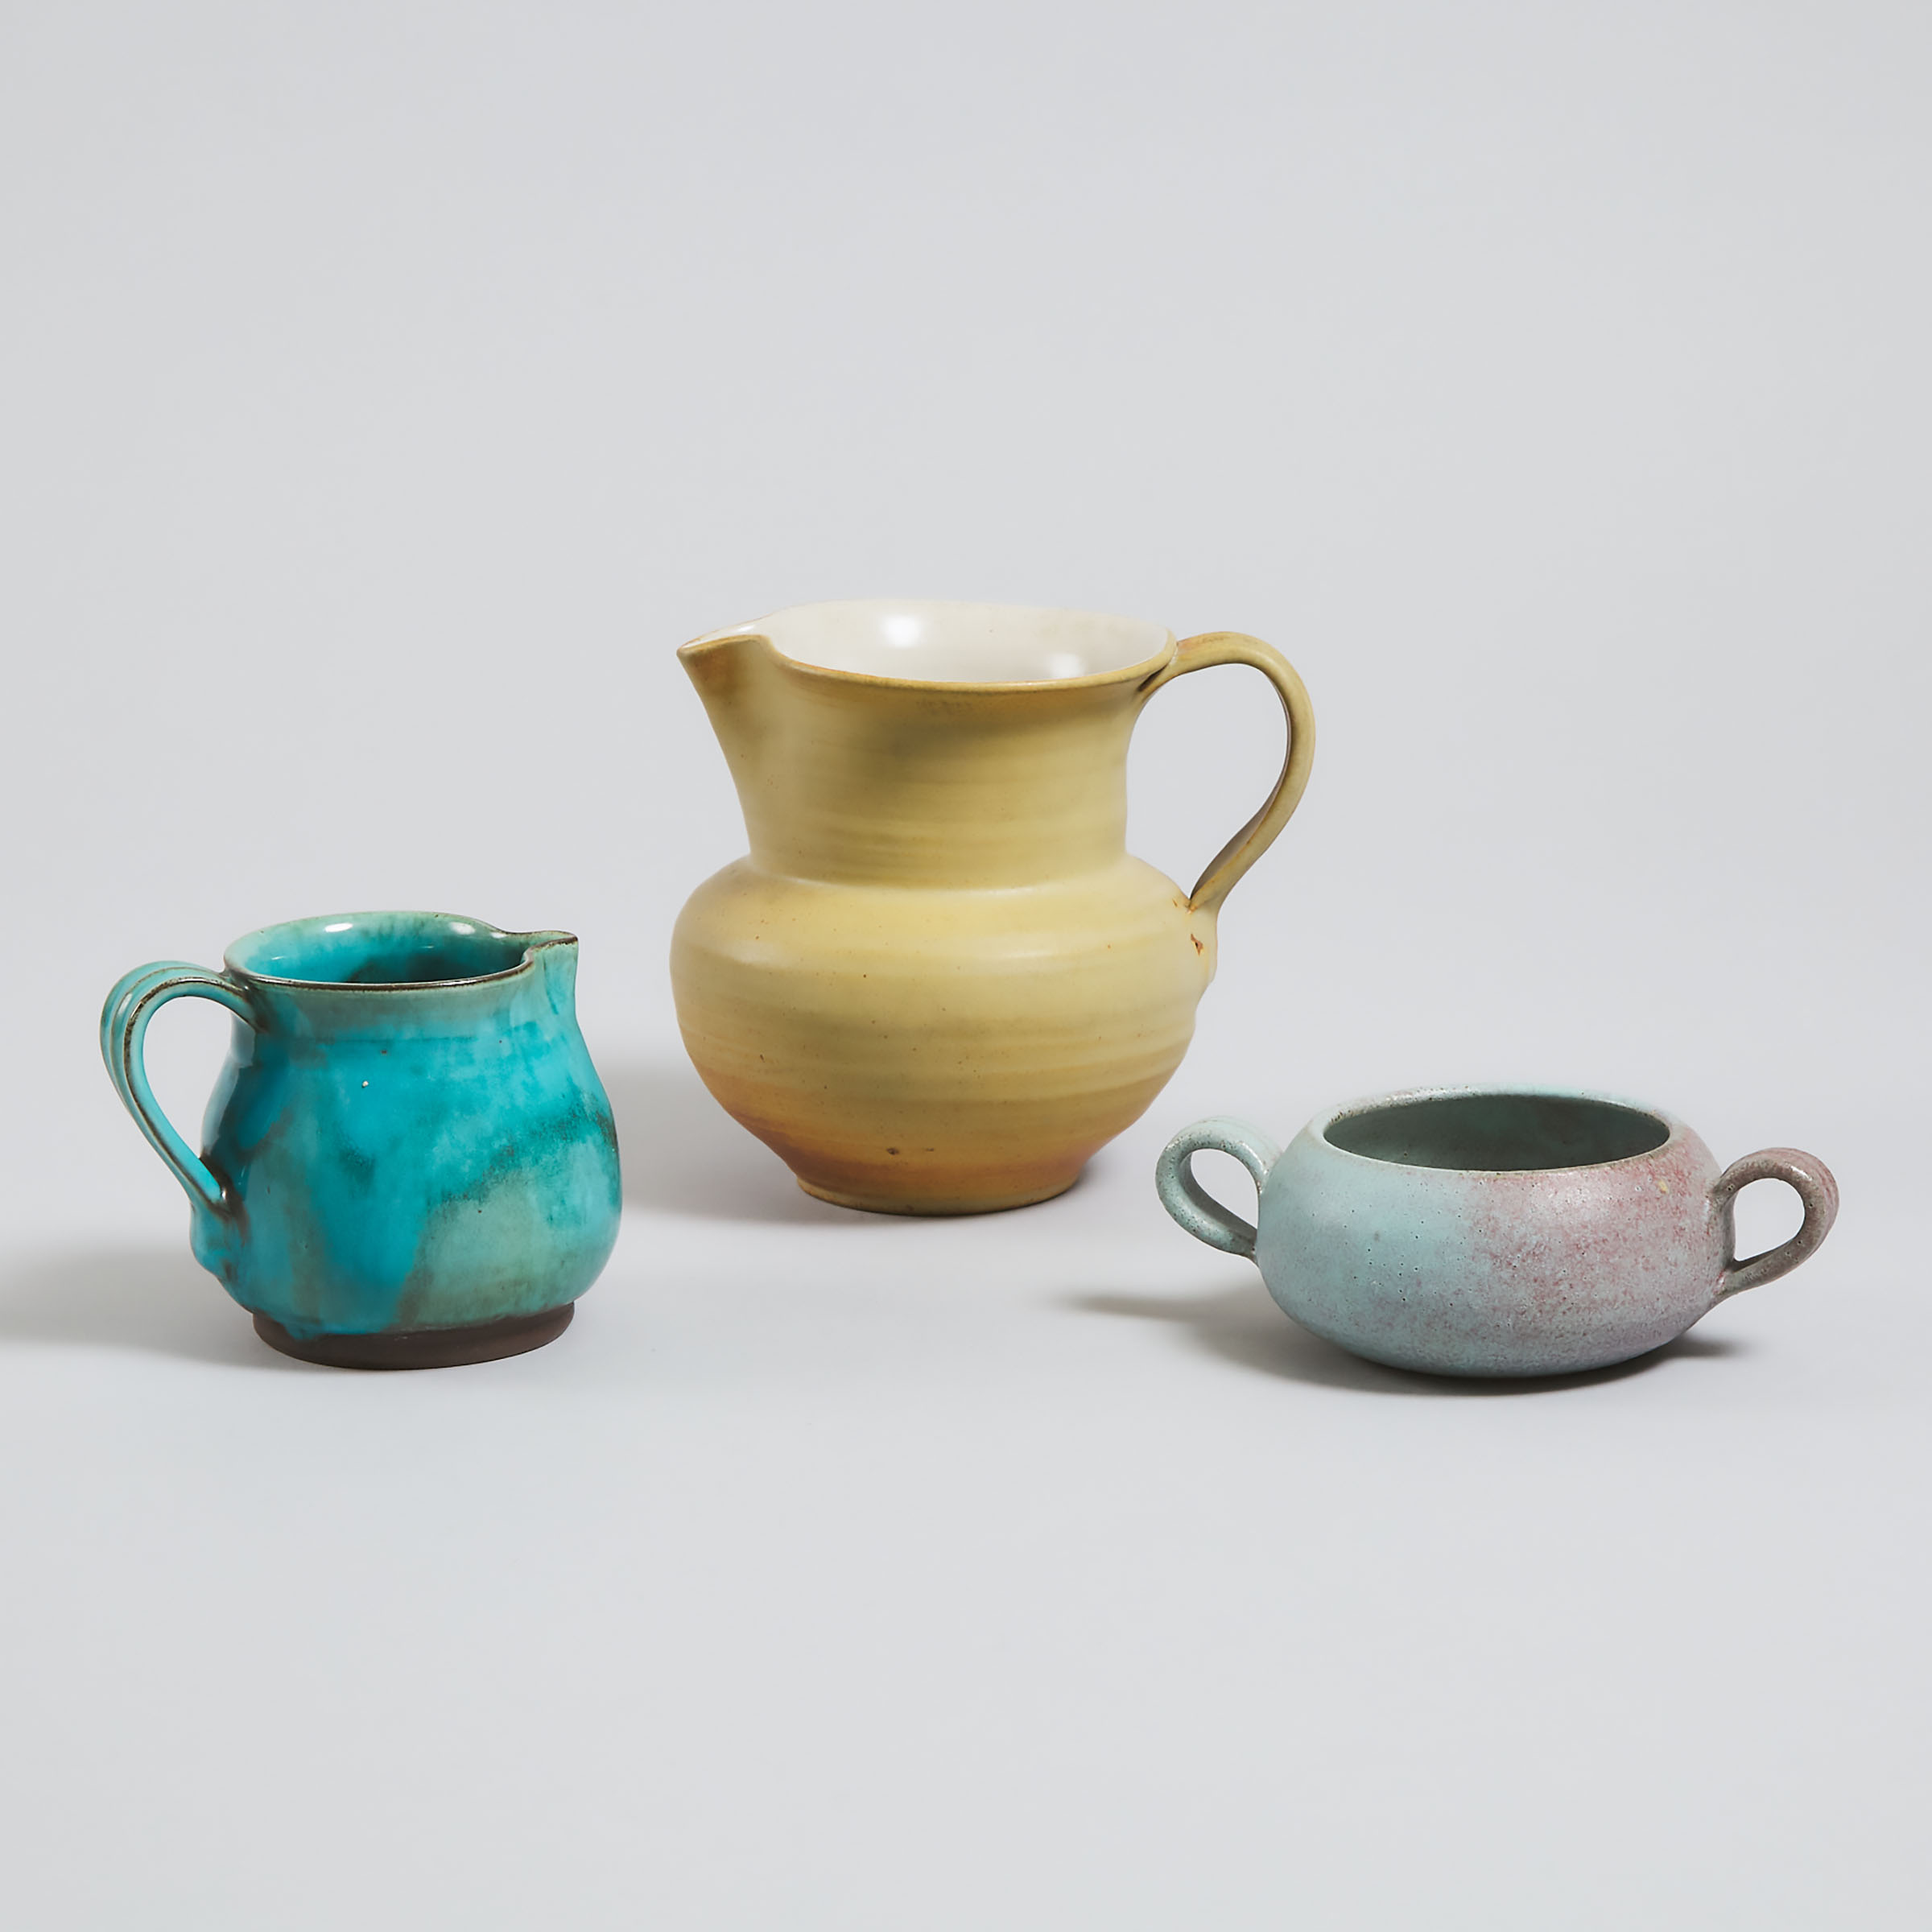 Two Deichmann Stoneware Jugs and a Two-Handled Bowl, mid-20th century